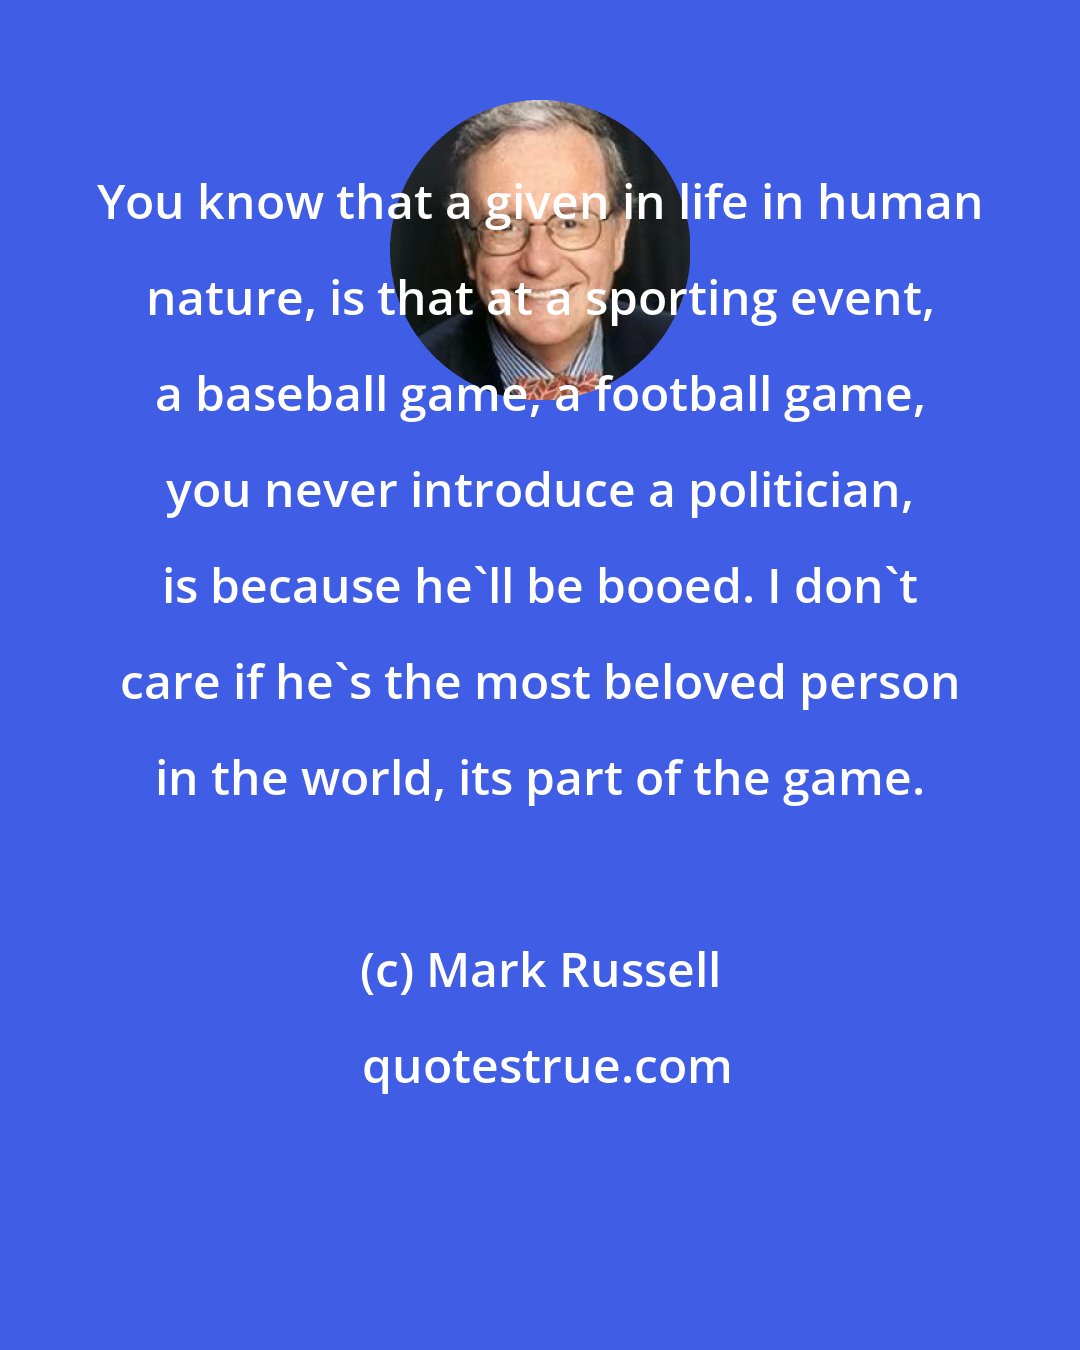 Mark Russell: You know that a given in life in human nature, is that at a sporting event, a baseball game, a football game, you never introduce a politician, is because he'll be booed. I don't care if he's the most beloved person in the world, its part of the game.